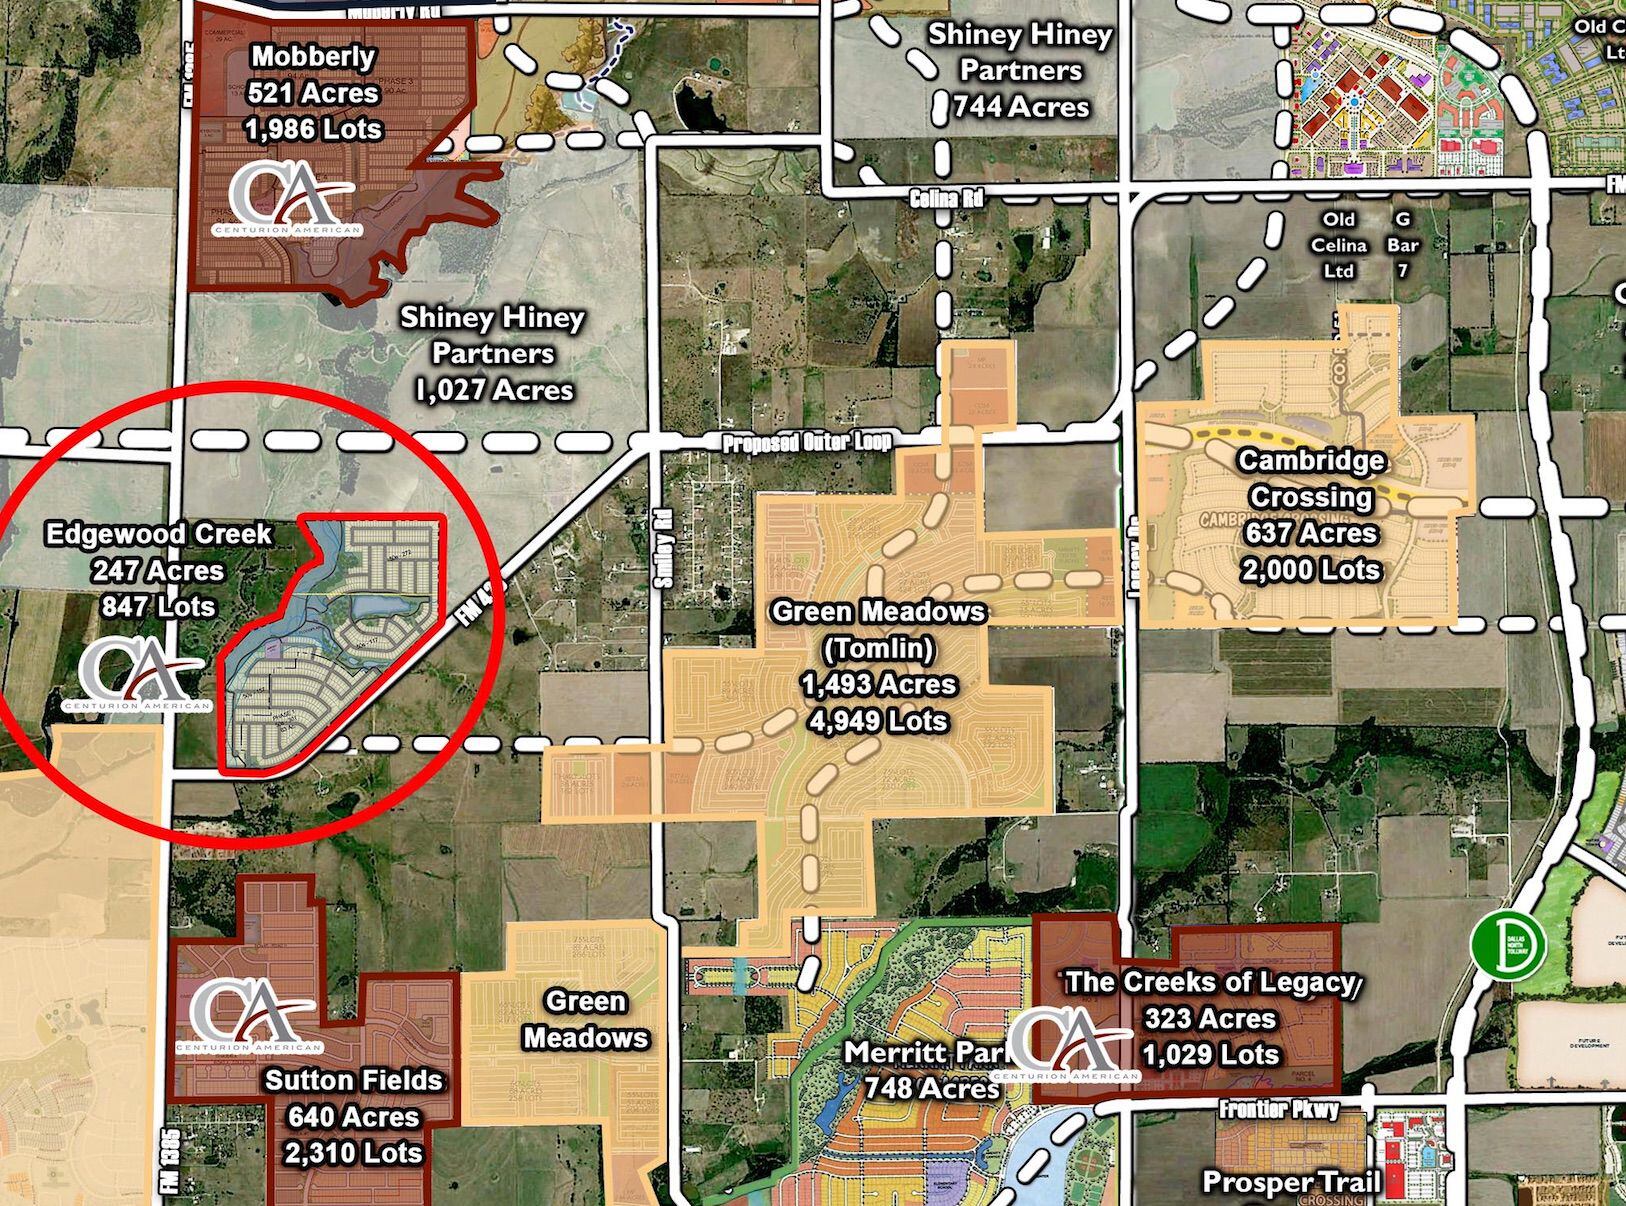 The Edgewood Creek property is west of the route of the planned Dallas North Tollway...